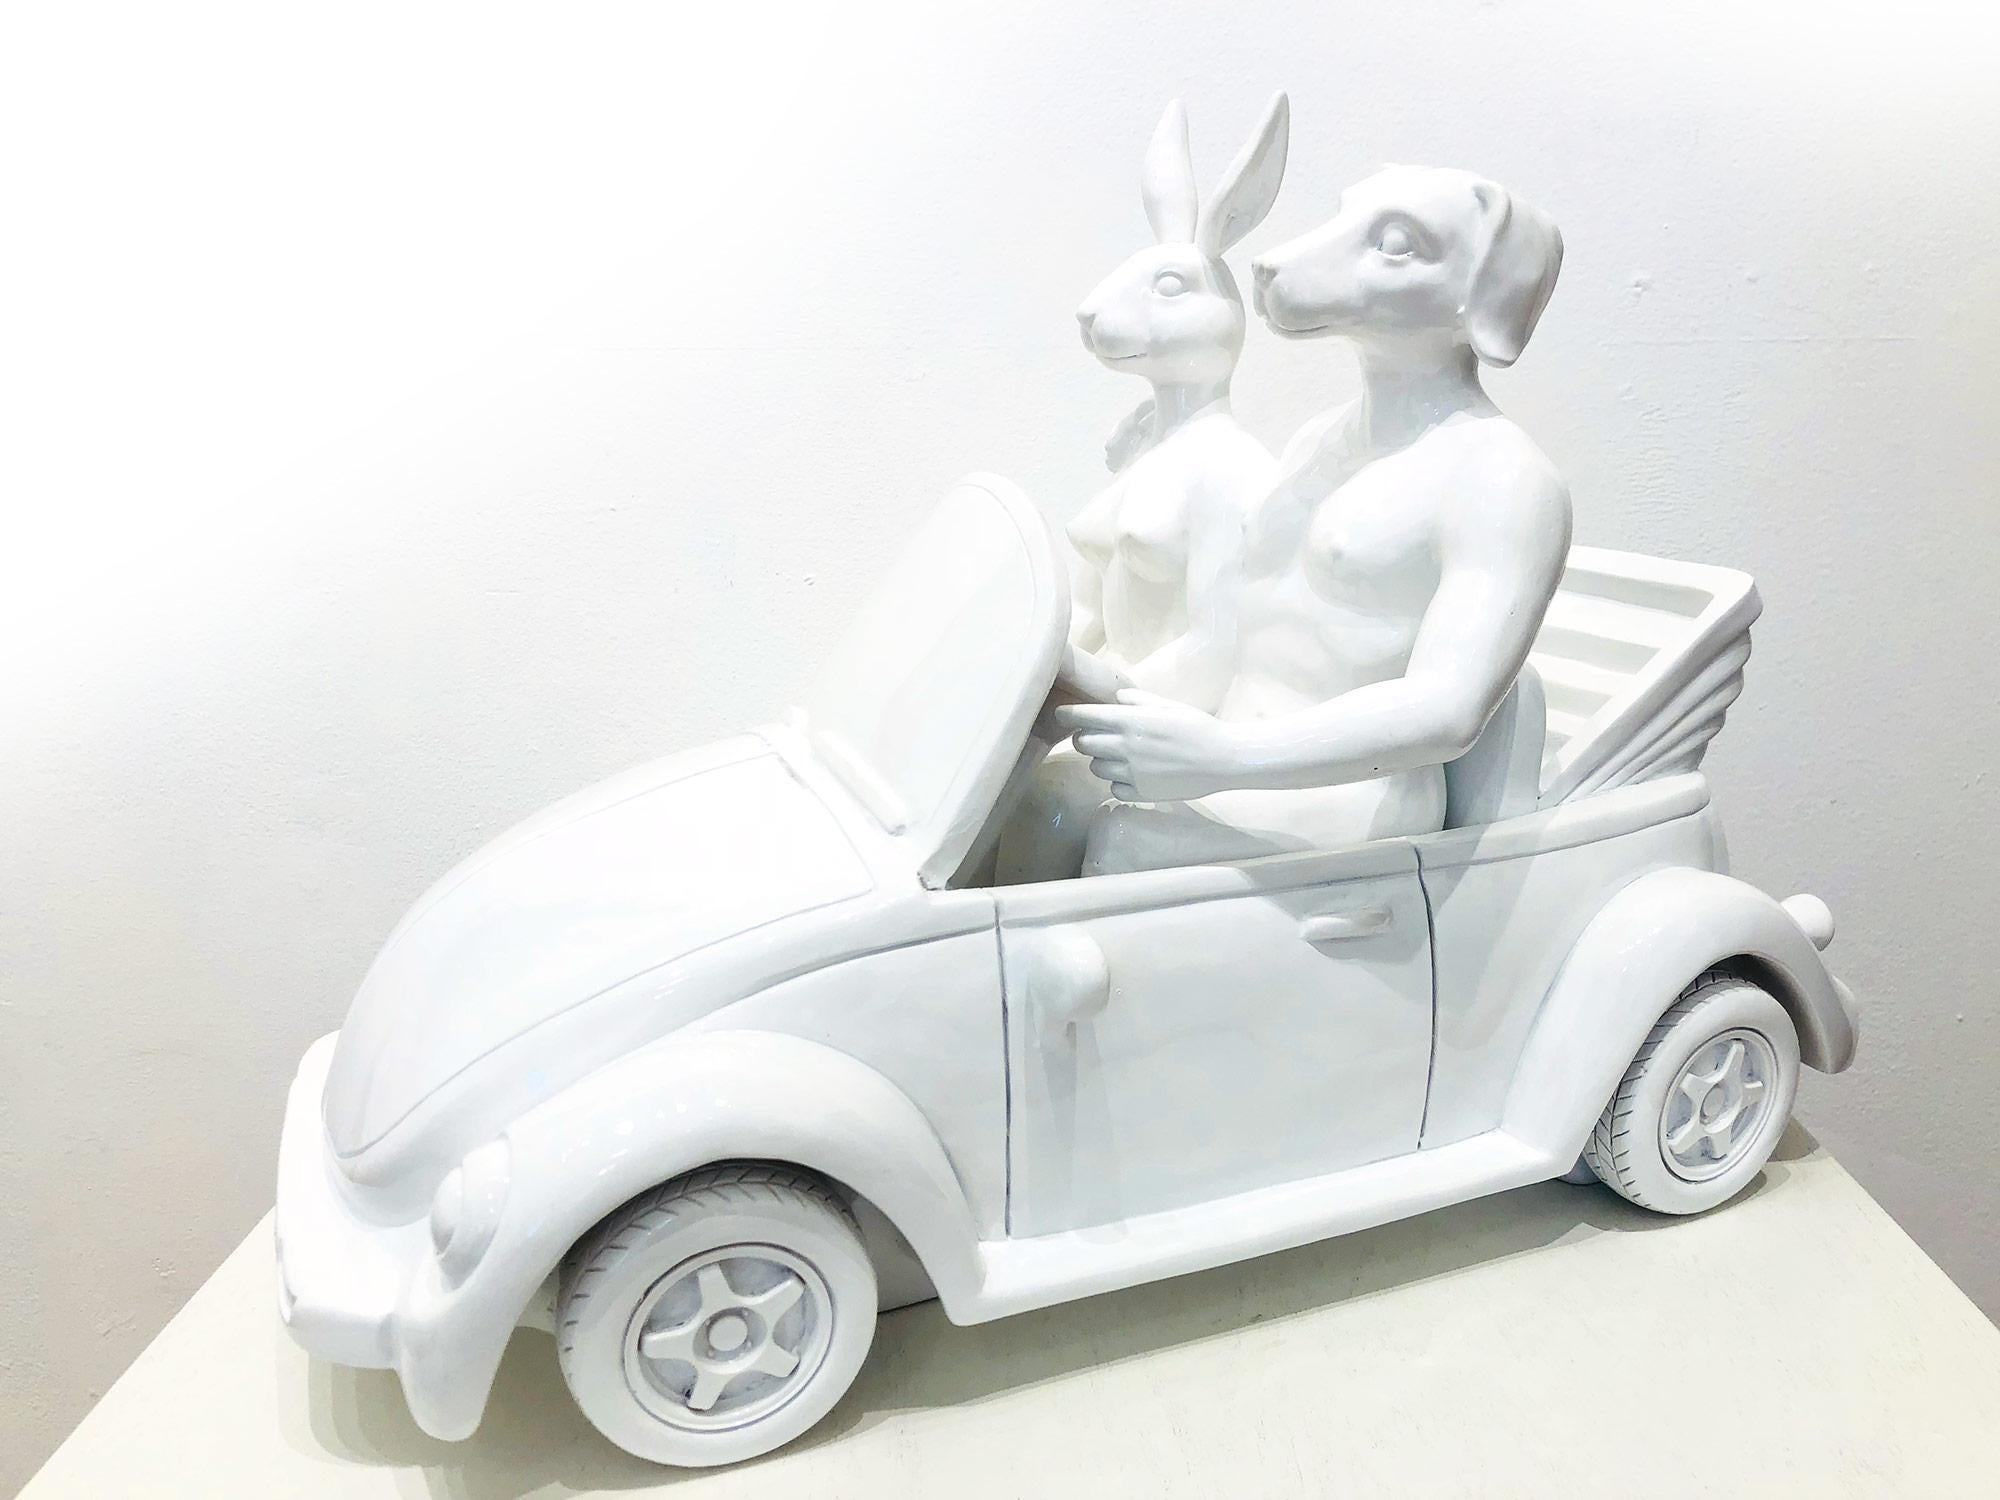 They Loved Driving Their Beetle Convertible Around the Sunny Shores of France - Sculpture by Gillie and Marc Schattner